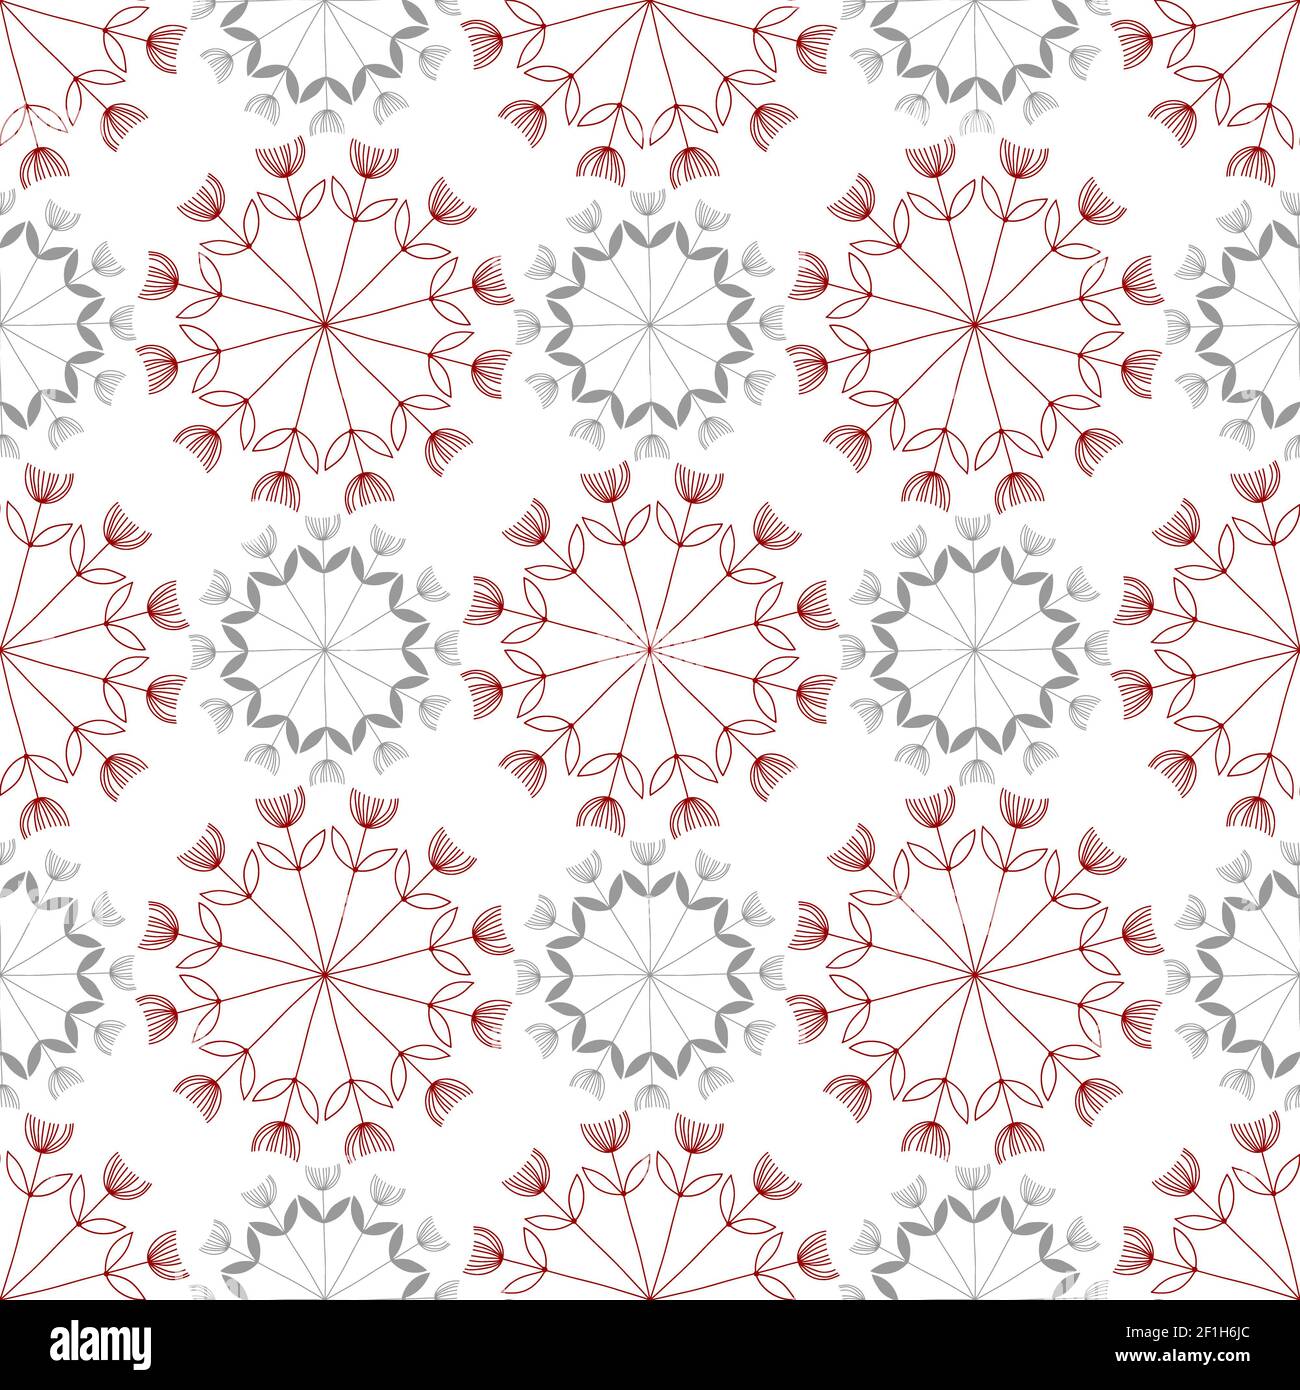 Vector illustration of seamless pattern with creative flowers. Stock Photo